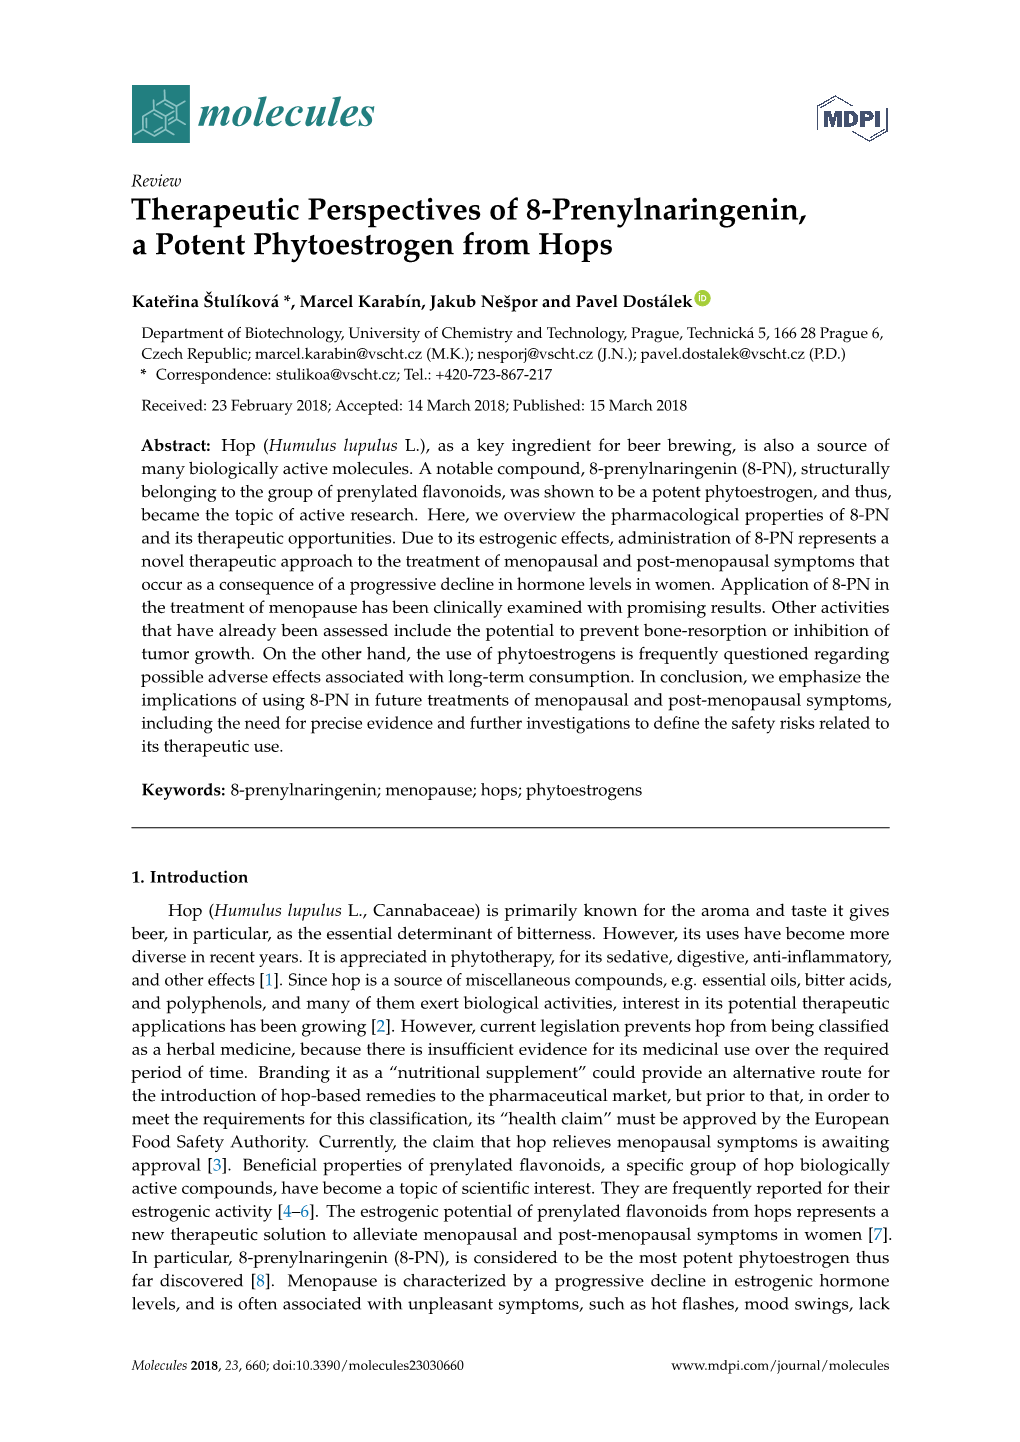 Therapeutic Perspectives of 8-Prenylnaringenin, a Potent Phytoestrogen from Hops